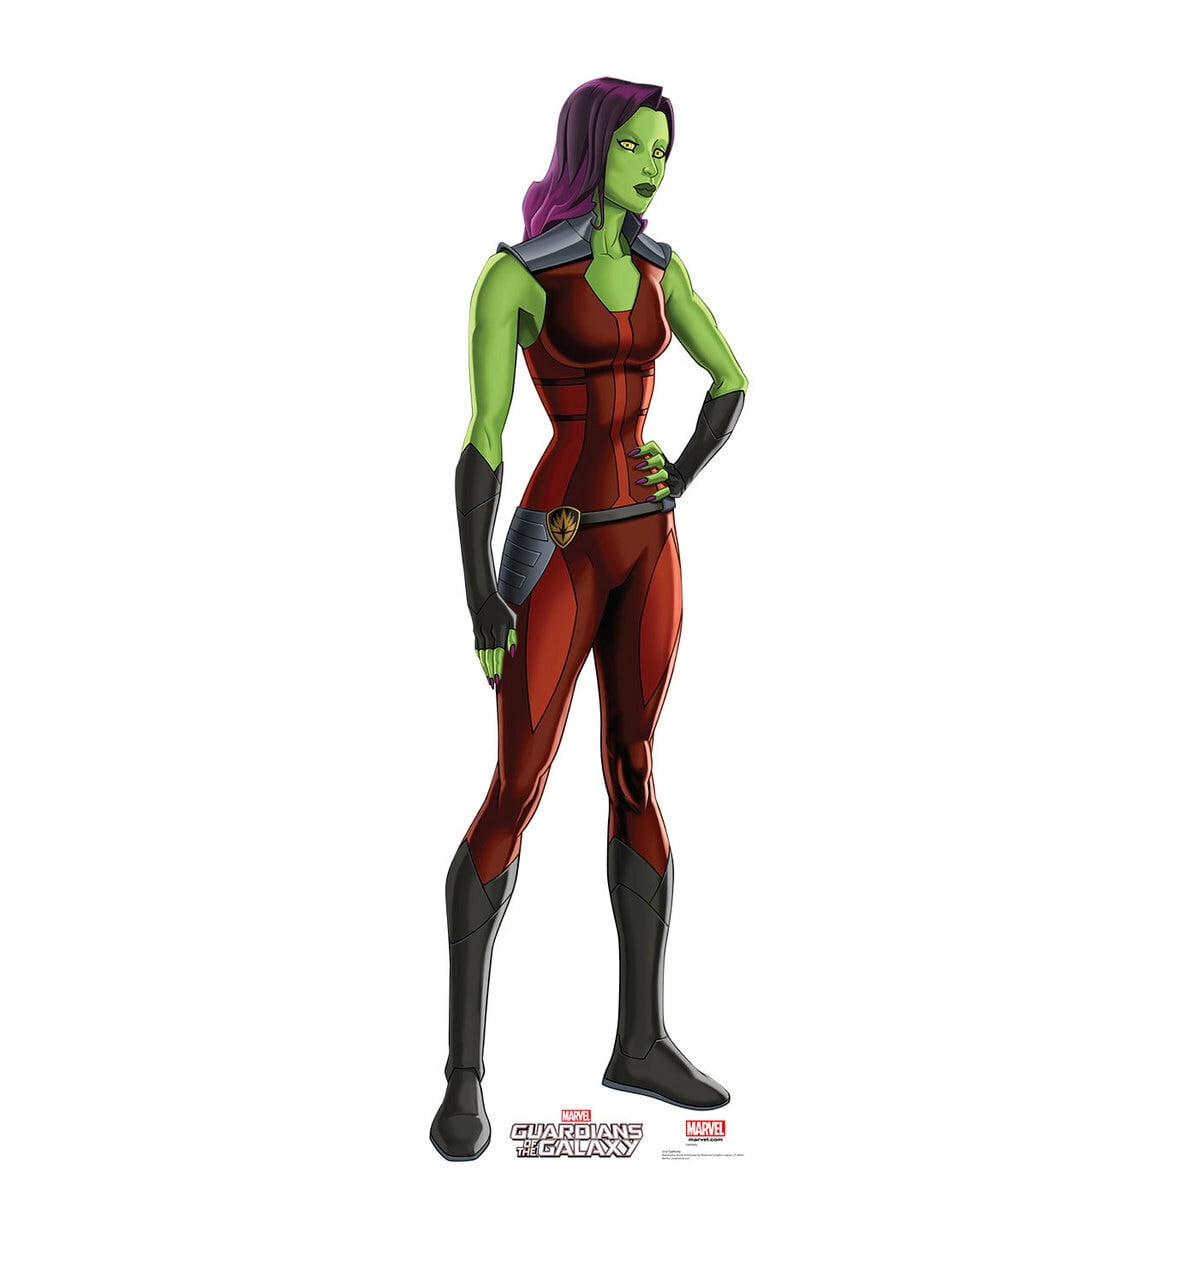 Picture of Advanced Graphics 2059 65 x 19 in. Gamora - Animated Guardians of the Galaxy Cardboard Standup